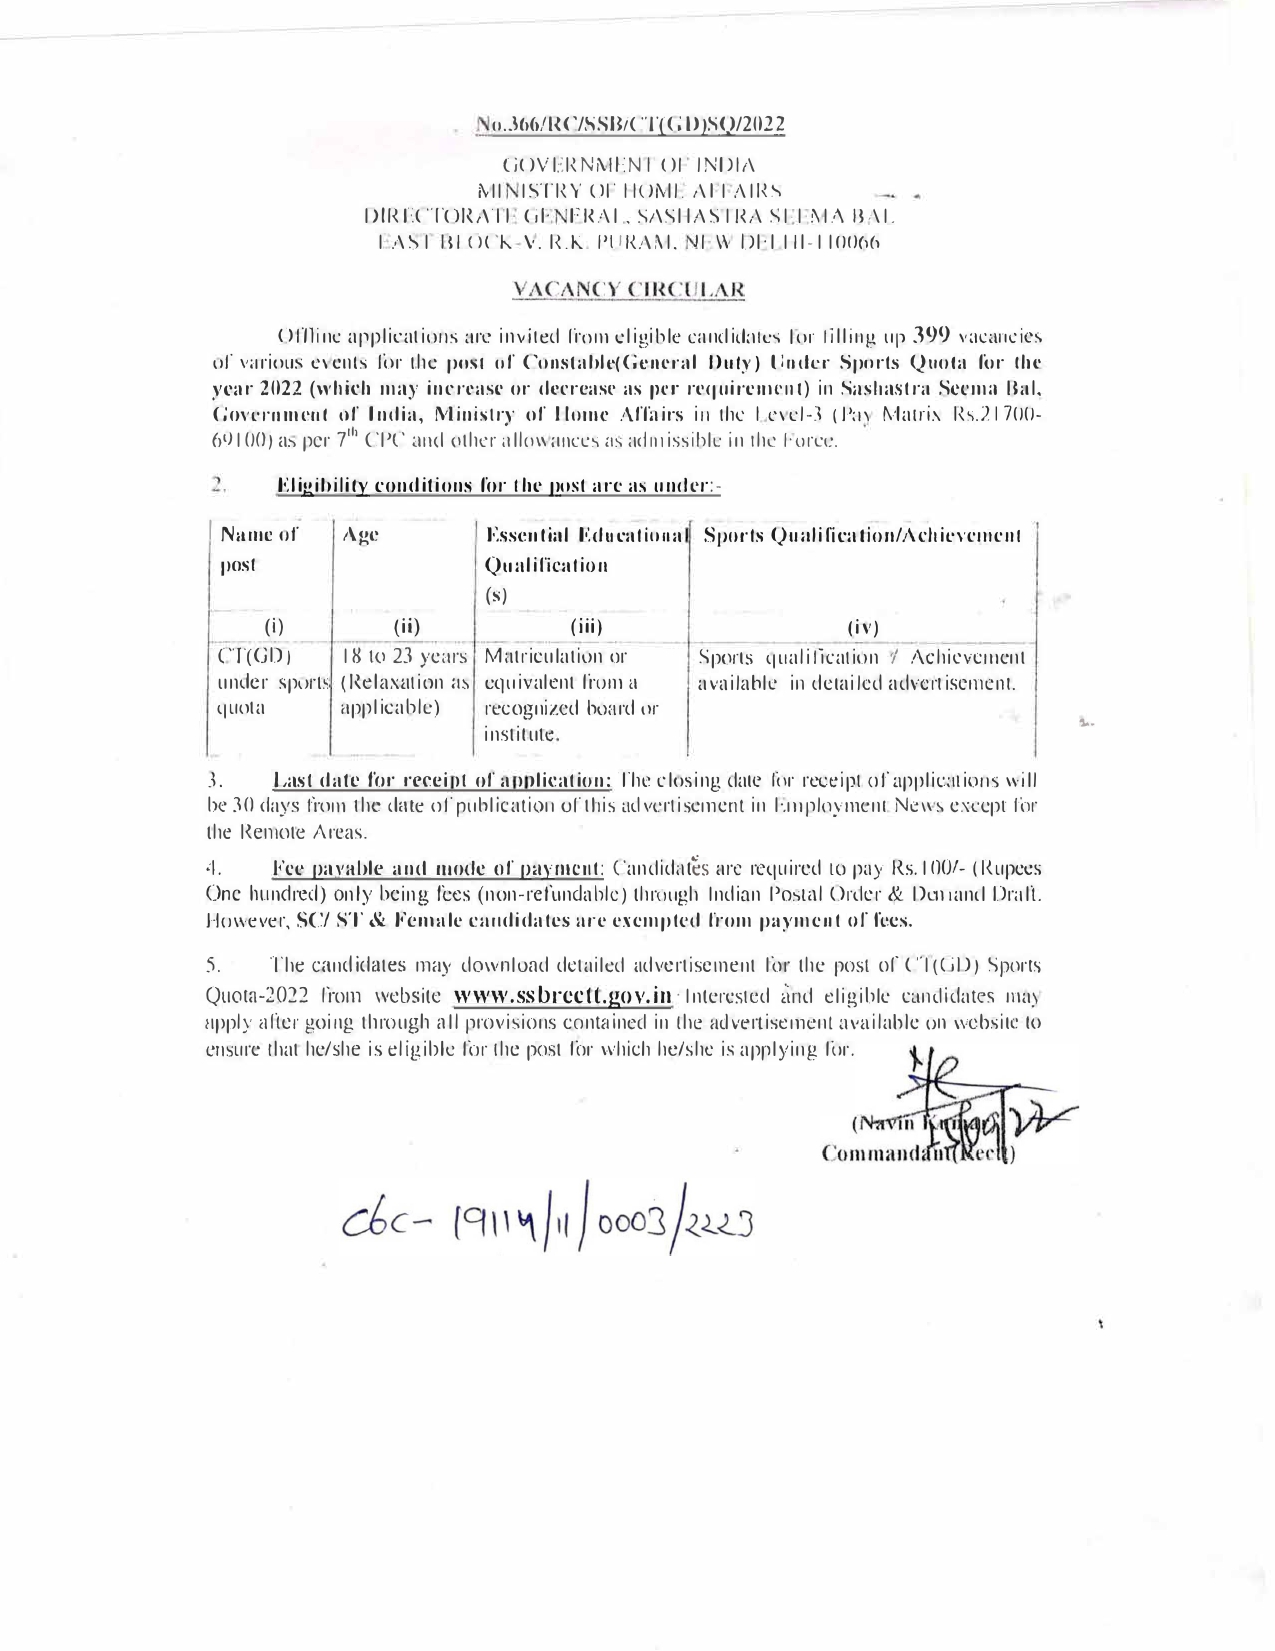 ssb constable gd sports quota short notice 2022_page-0001.jpg